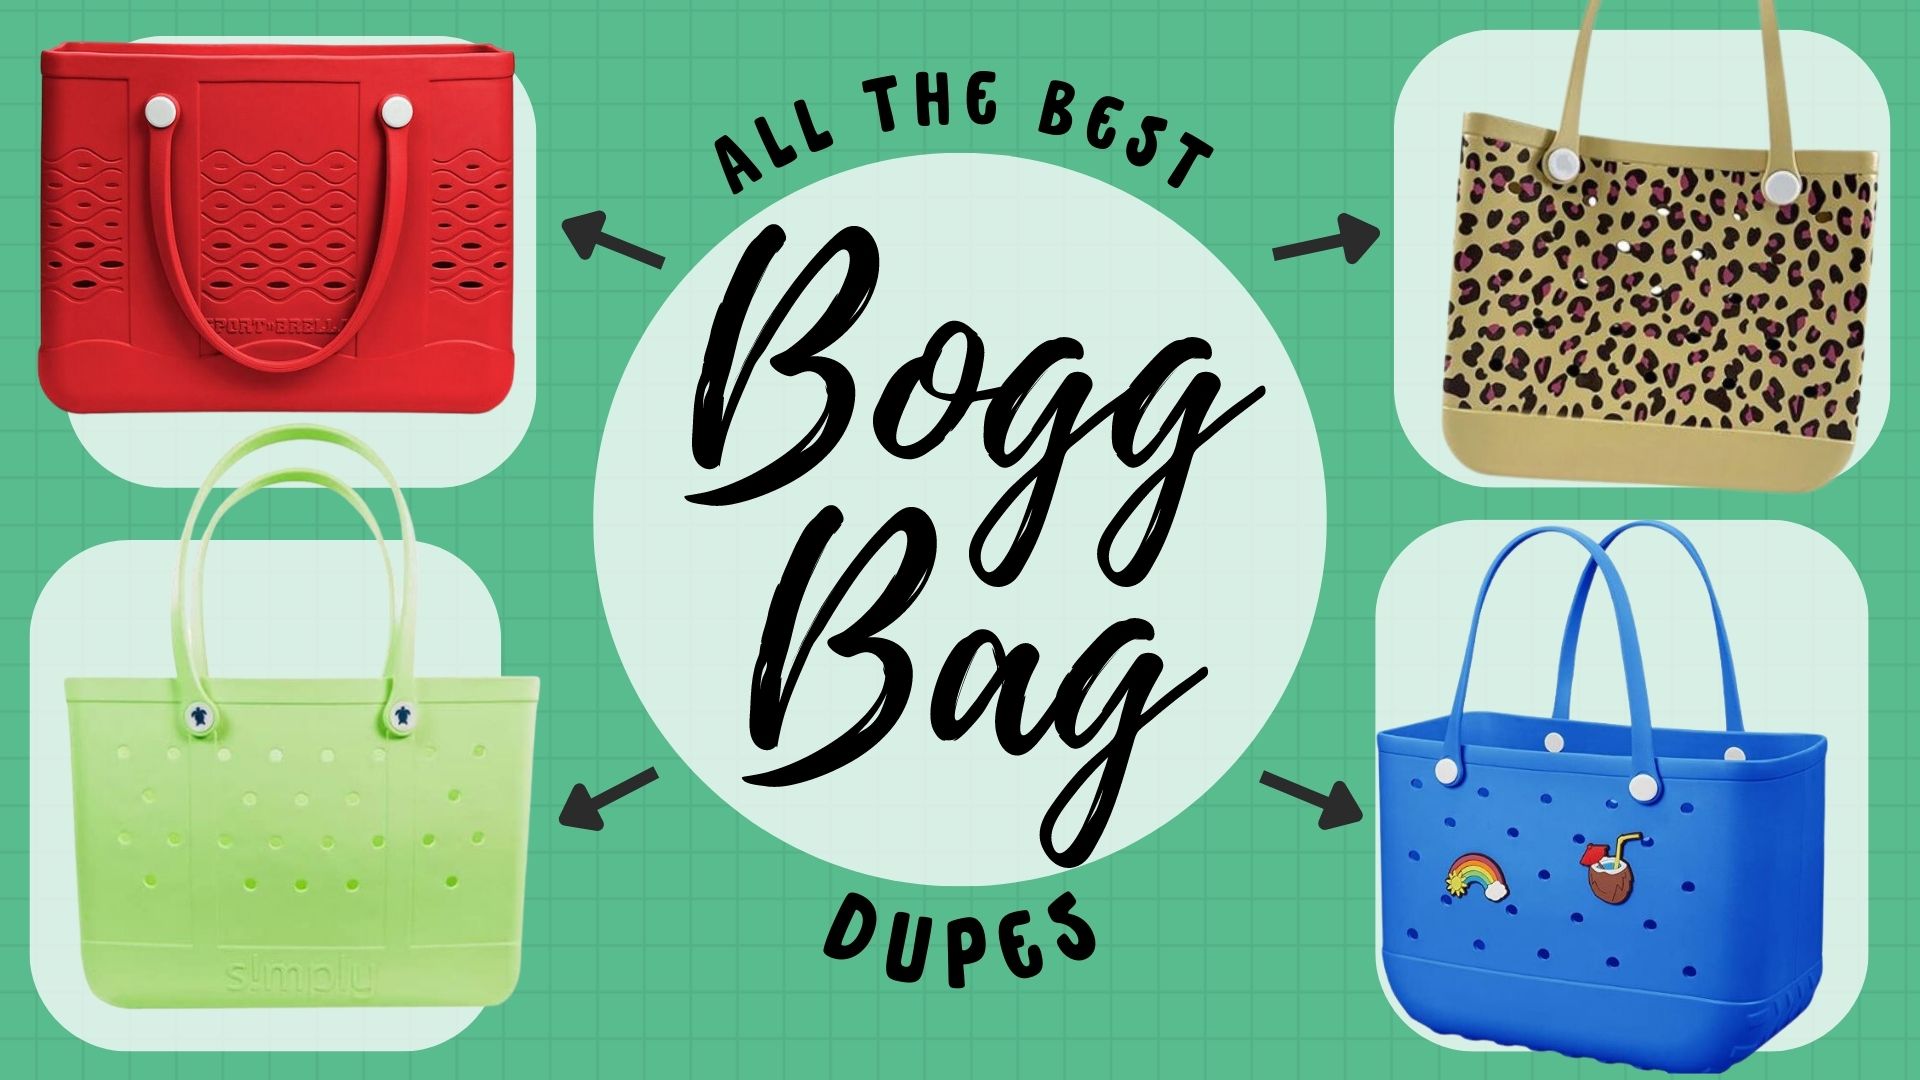 All The Best Bogg Bag Dupes Southern Savers